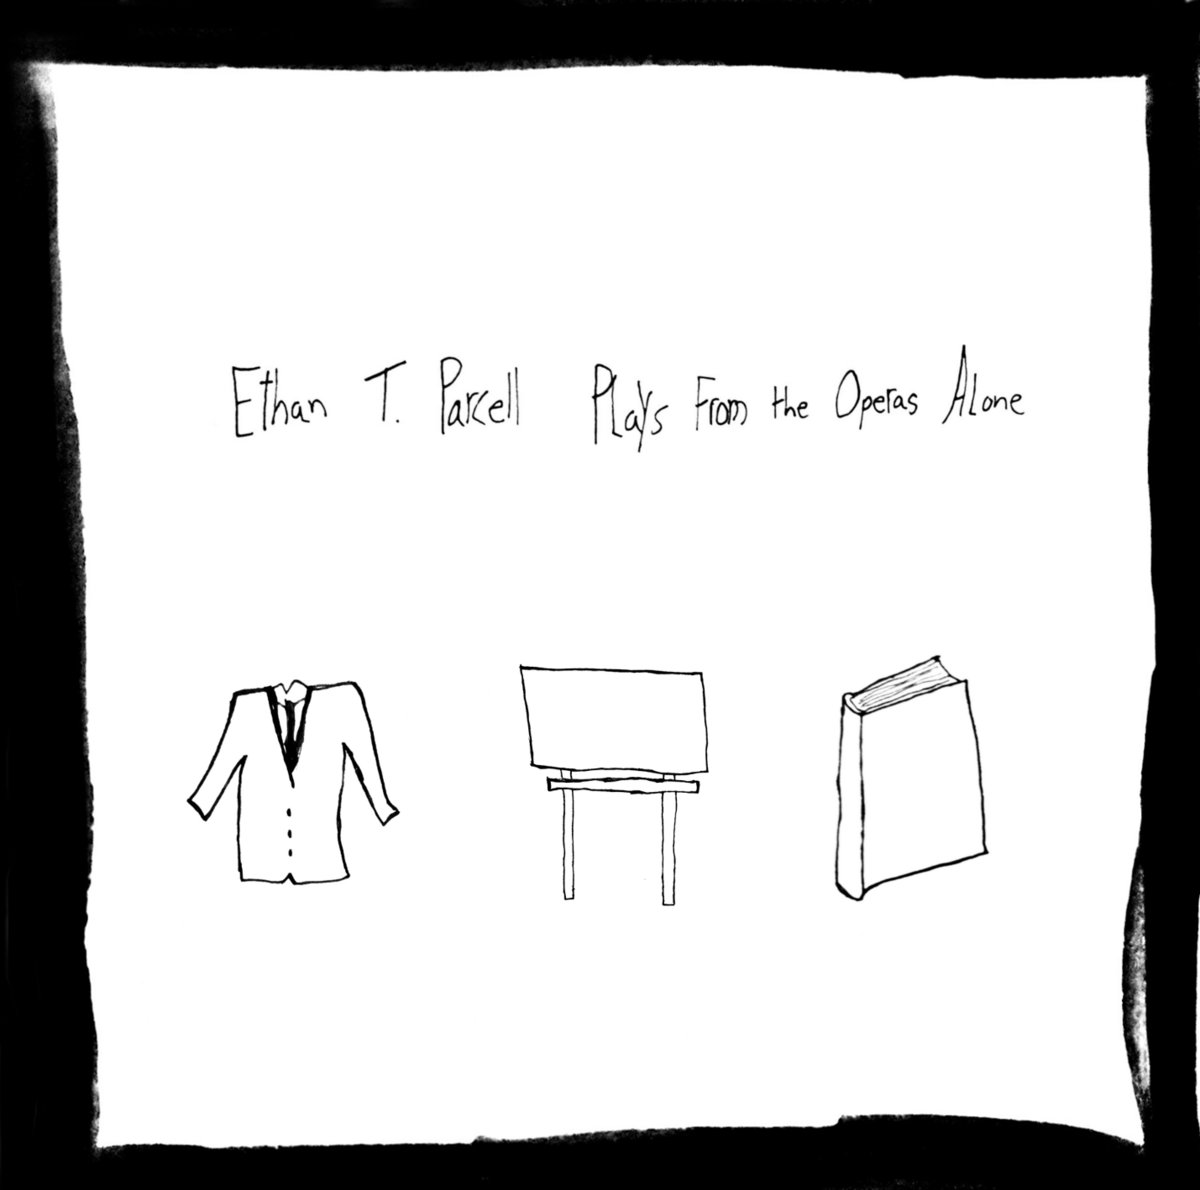 plays from the operas alone ethan t parcell